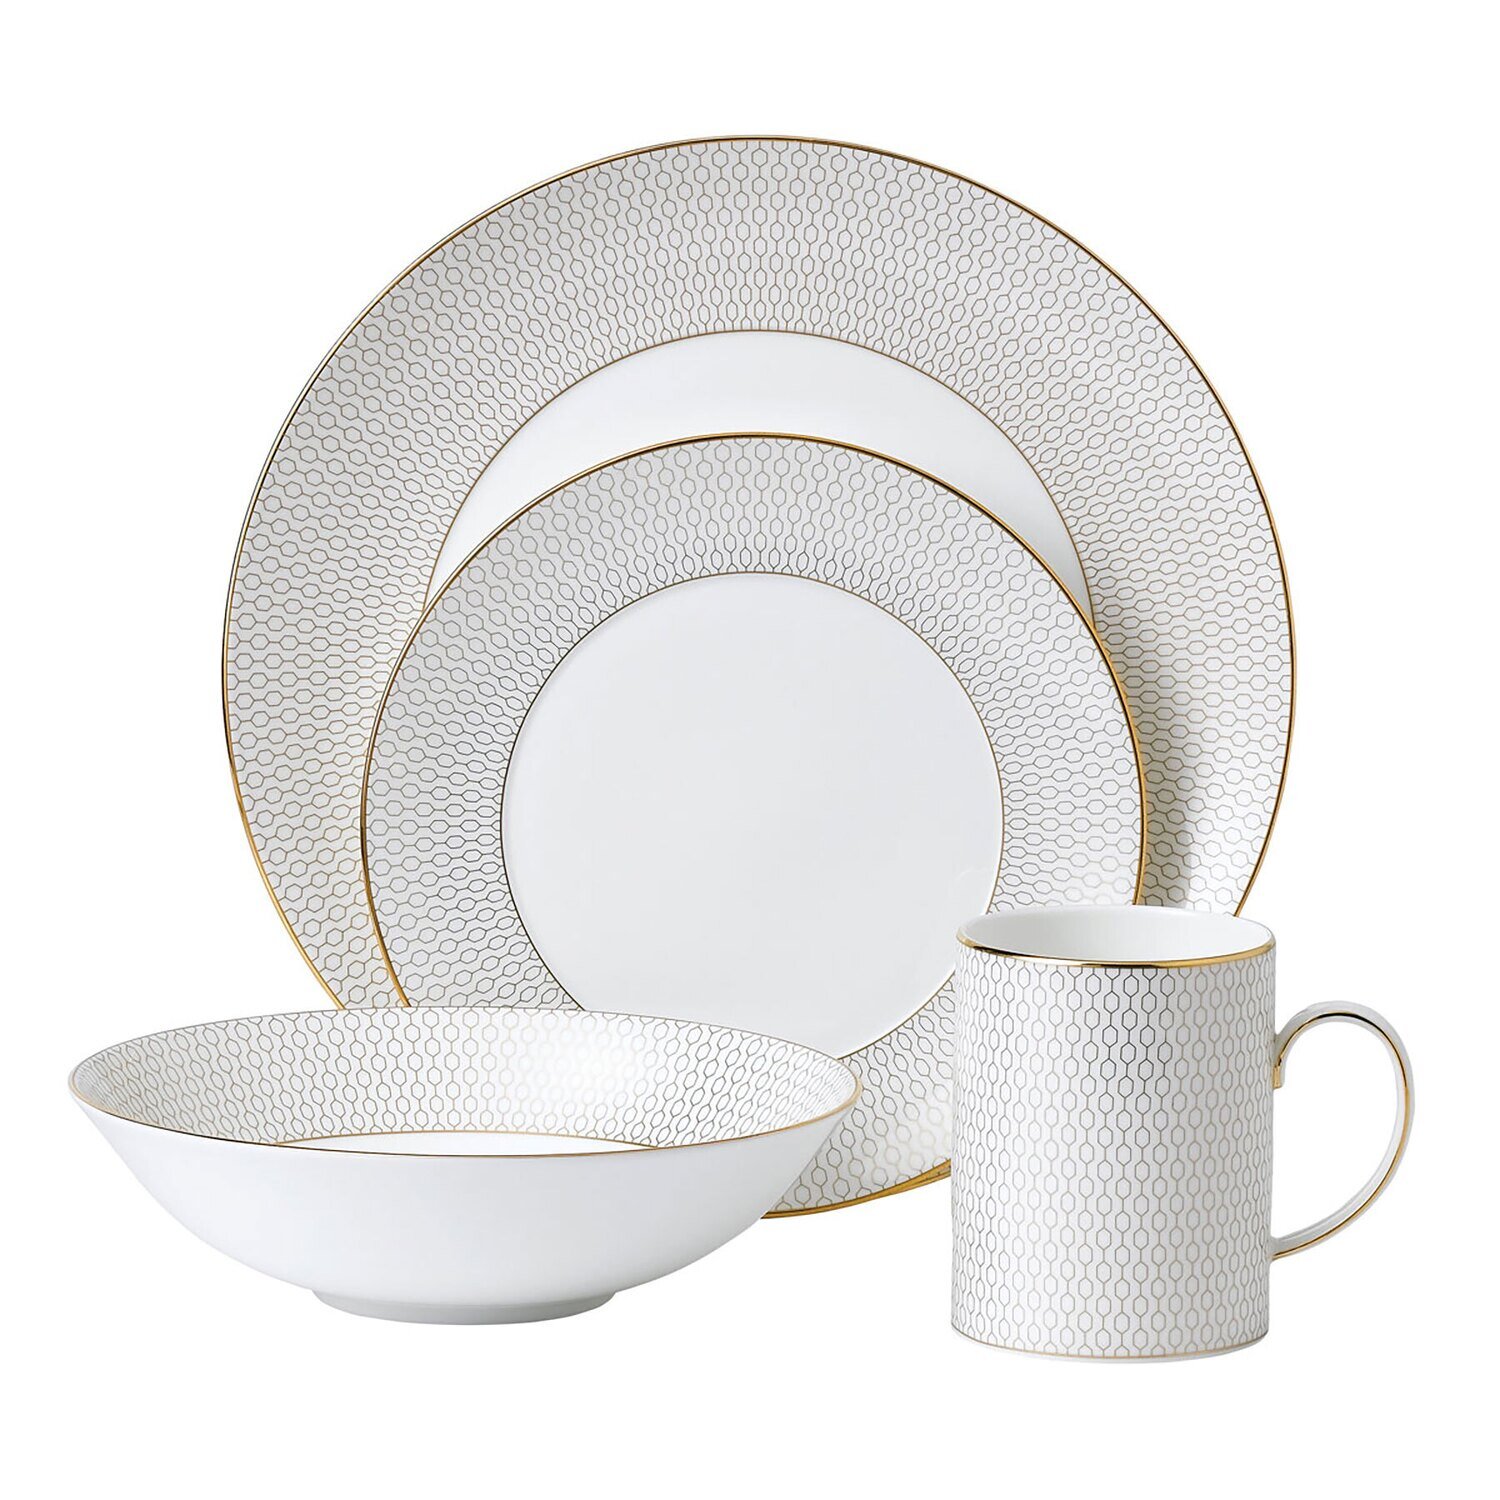 Wedgwood Arris 4-Piece Place Setting 1050602